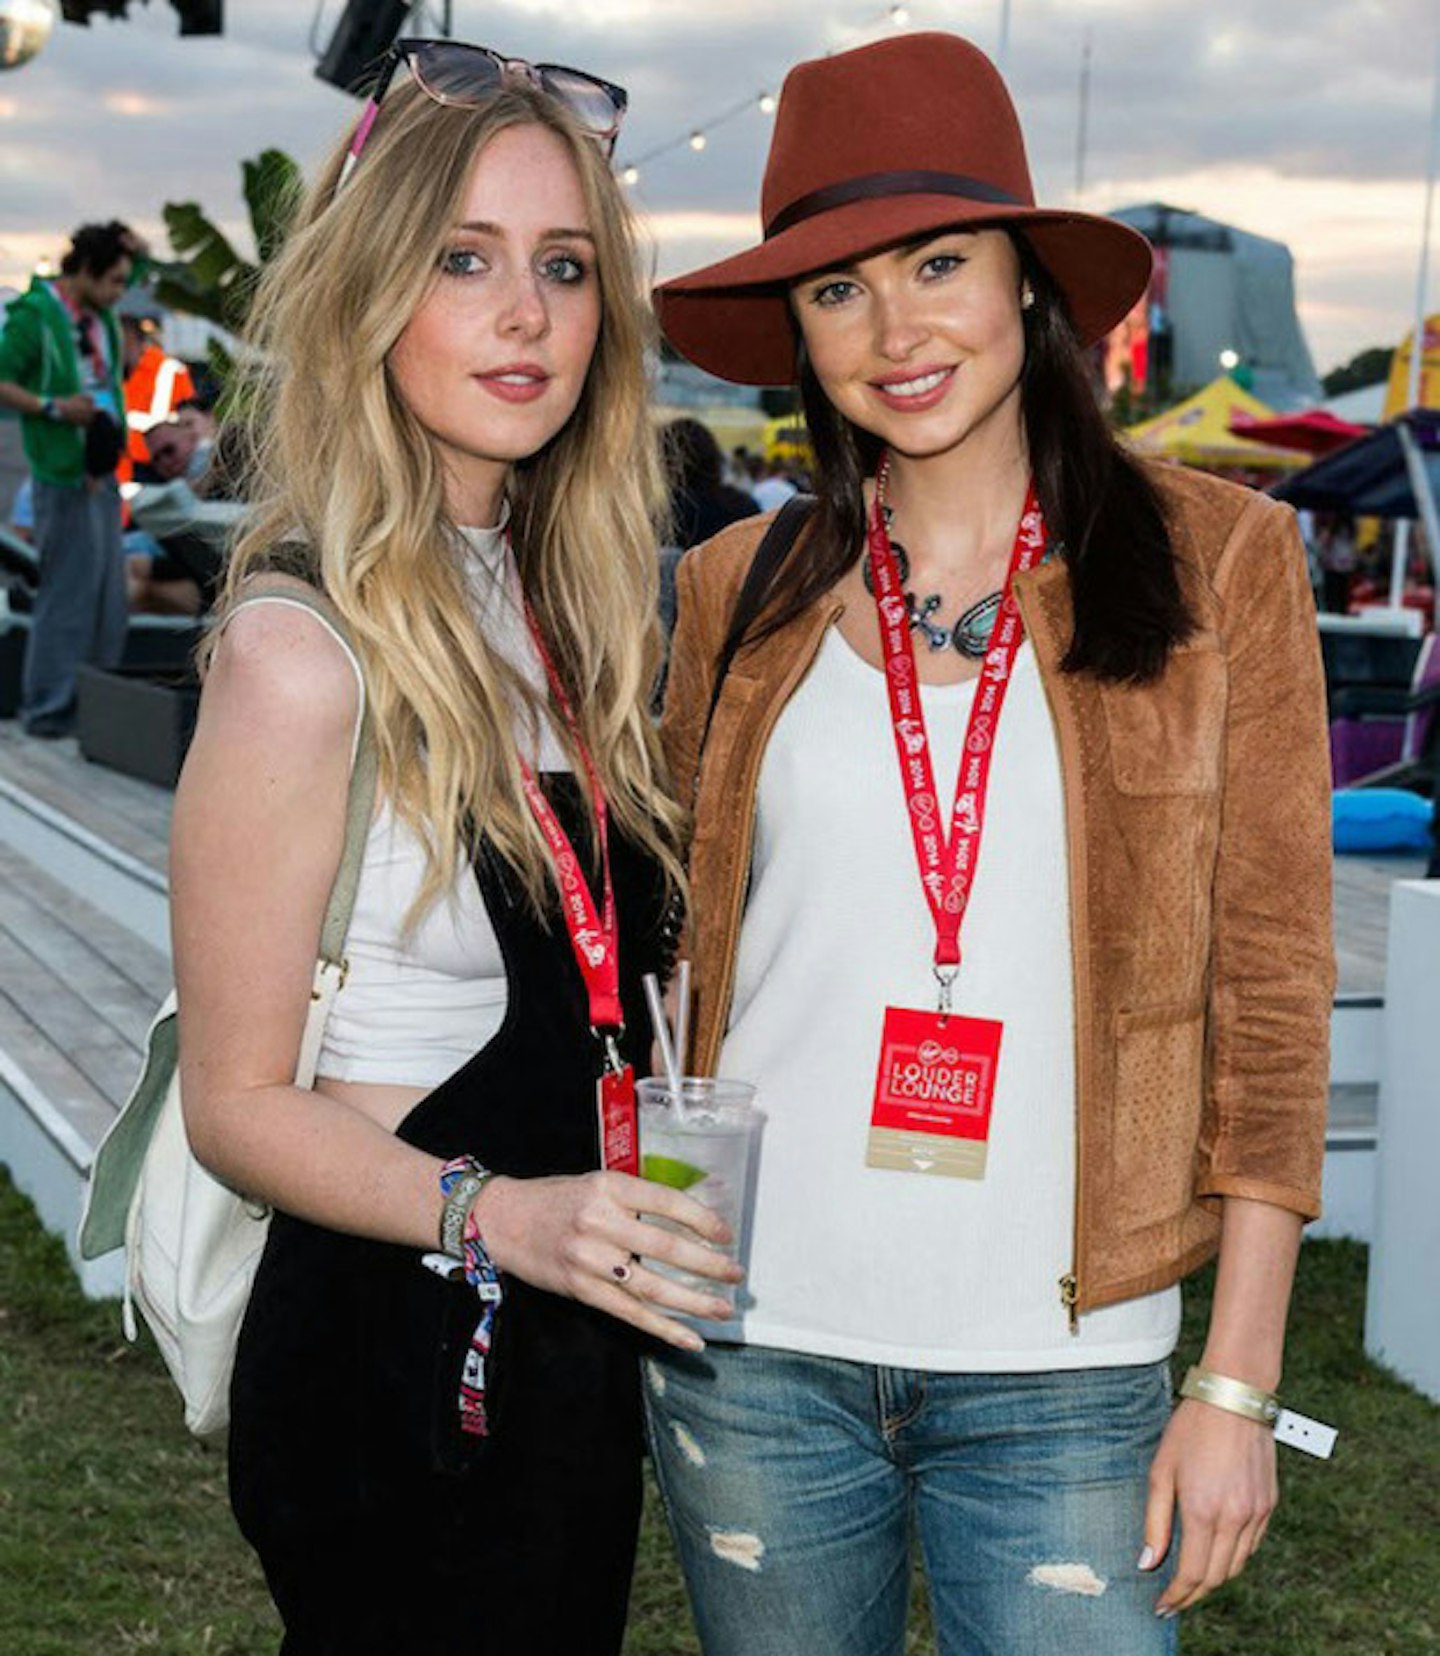 Diana Vickers and Emma Miller